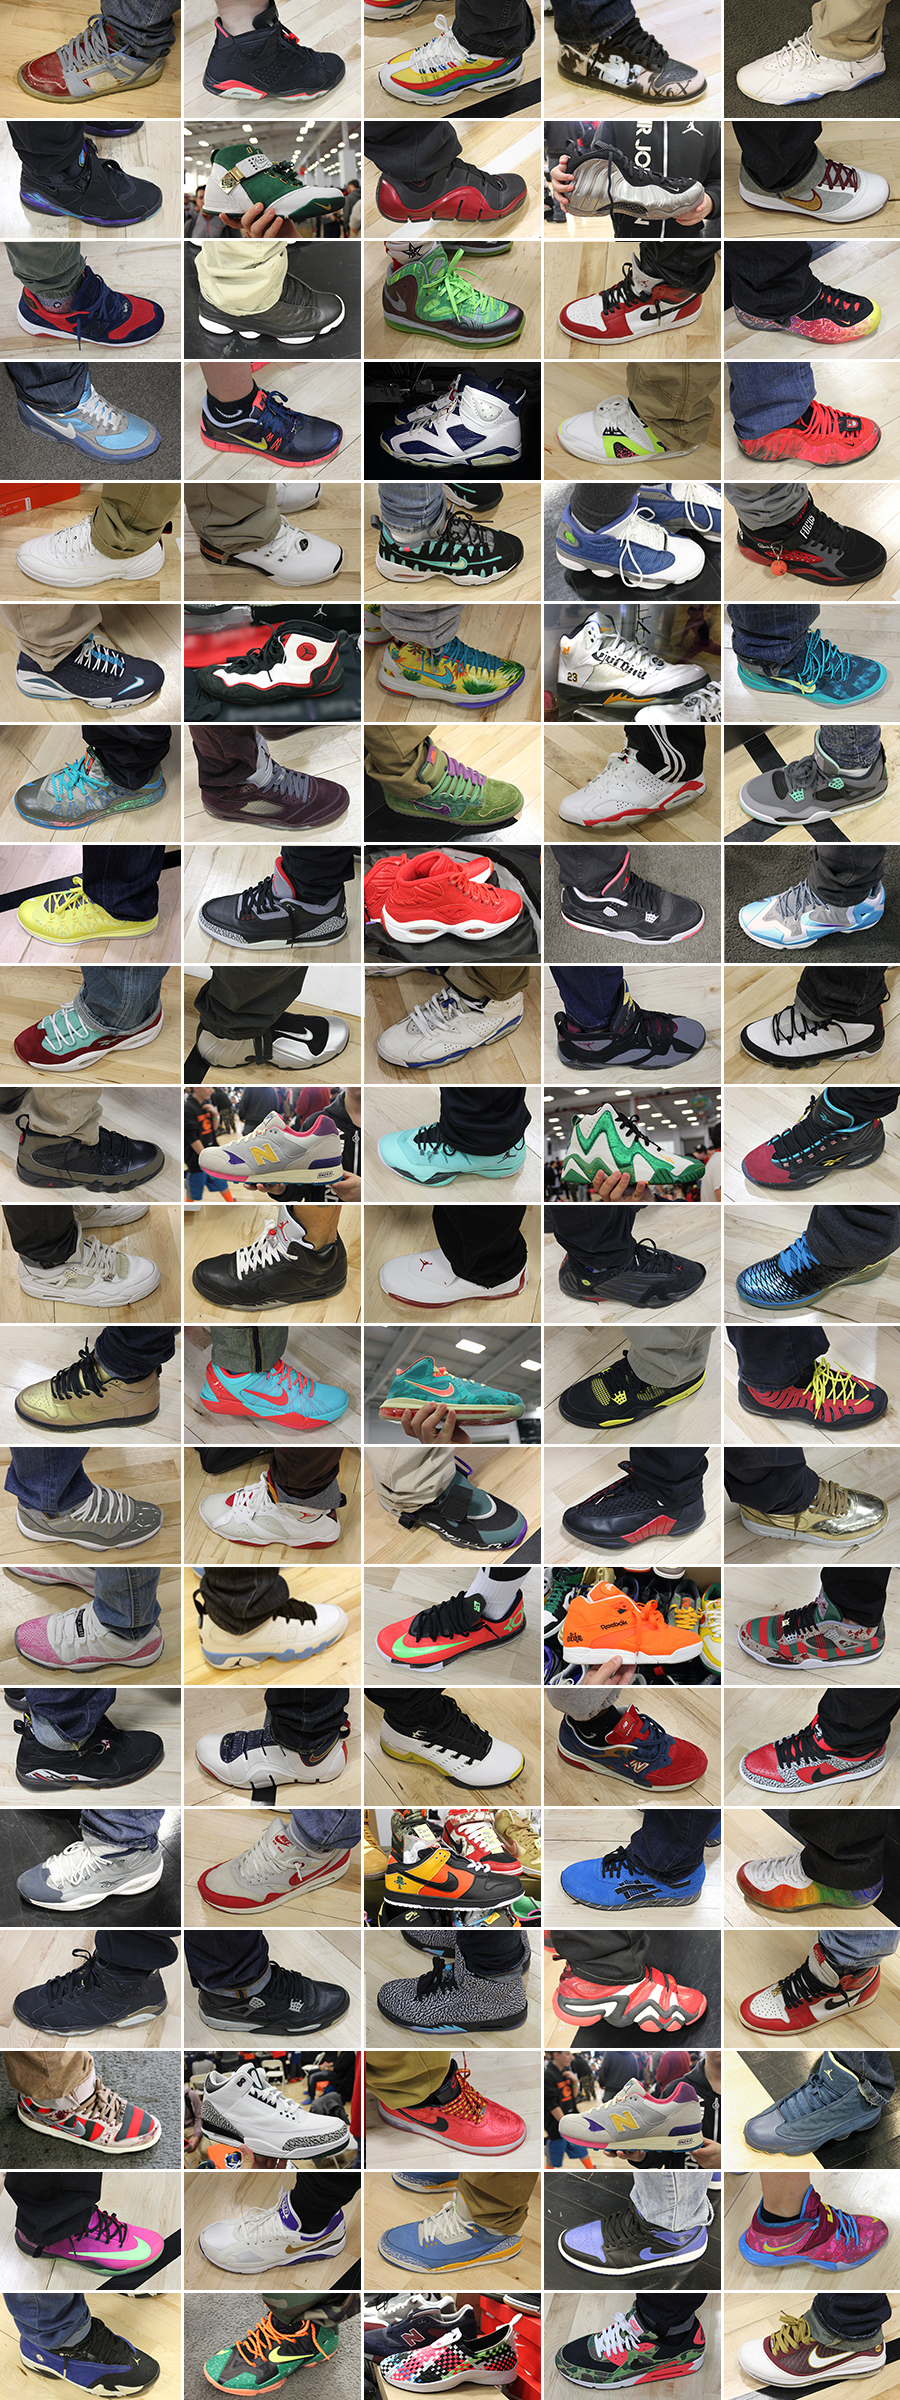 500 Shoes At Sneaker Con 03